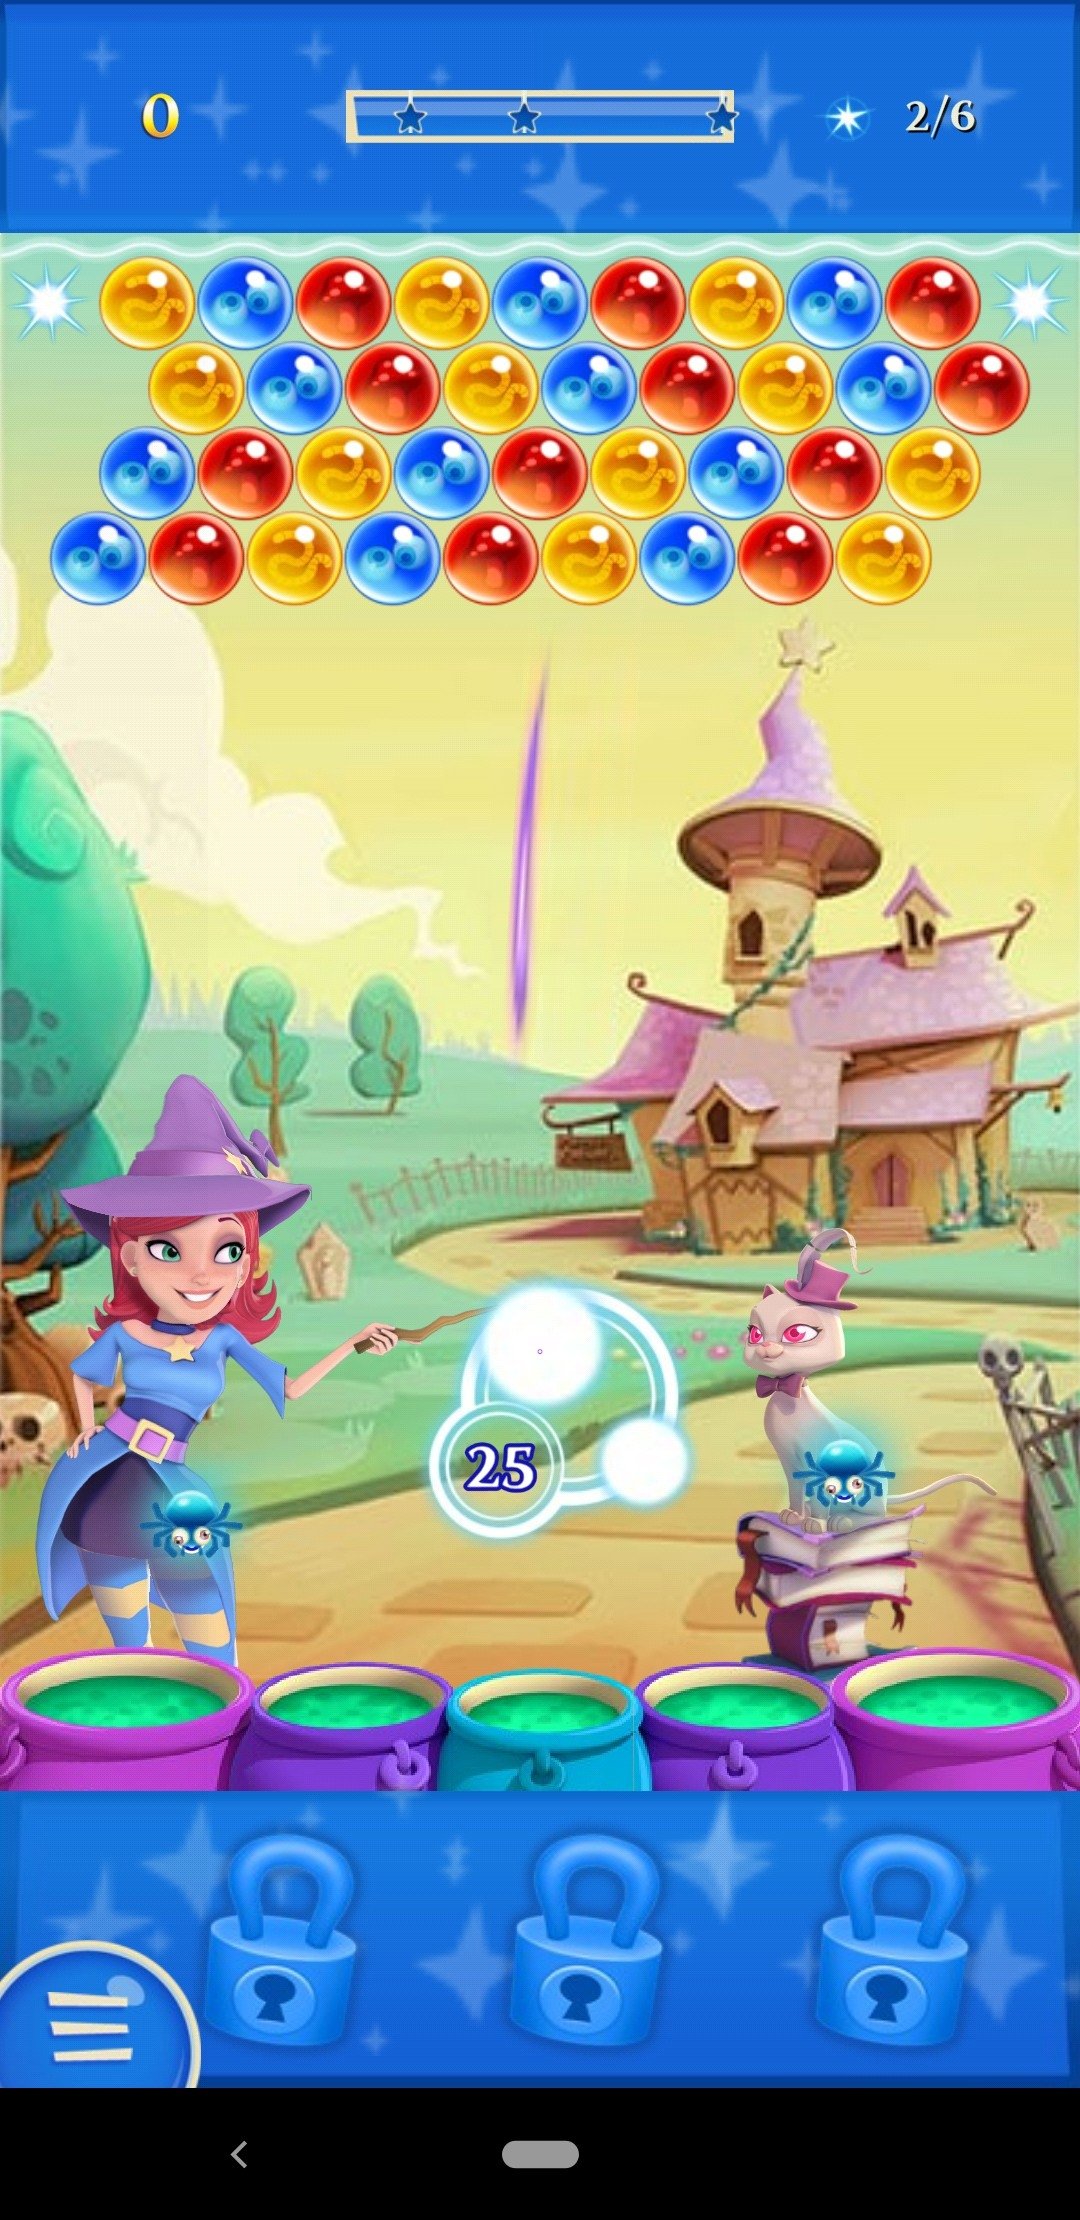 weather in Norway Maine How to get 3 stars in level 26 of bubble witch saga 3